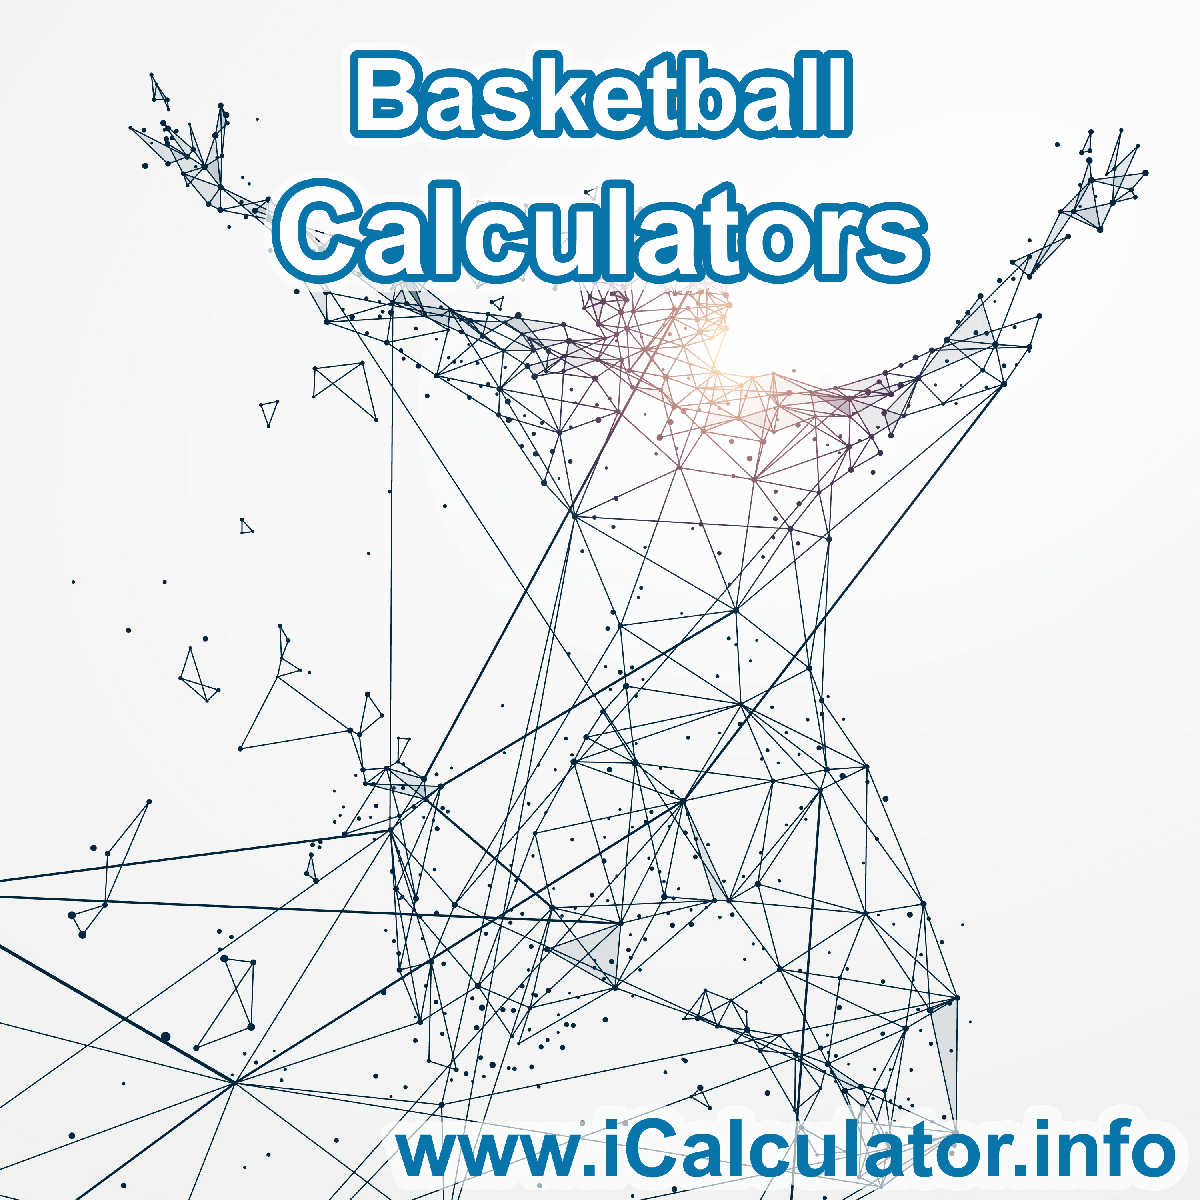 Basketball Calculator. This image shows an Basketball player playing basketball - by iCalculator